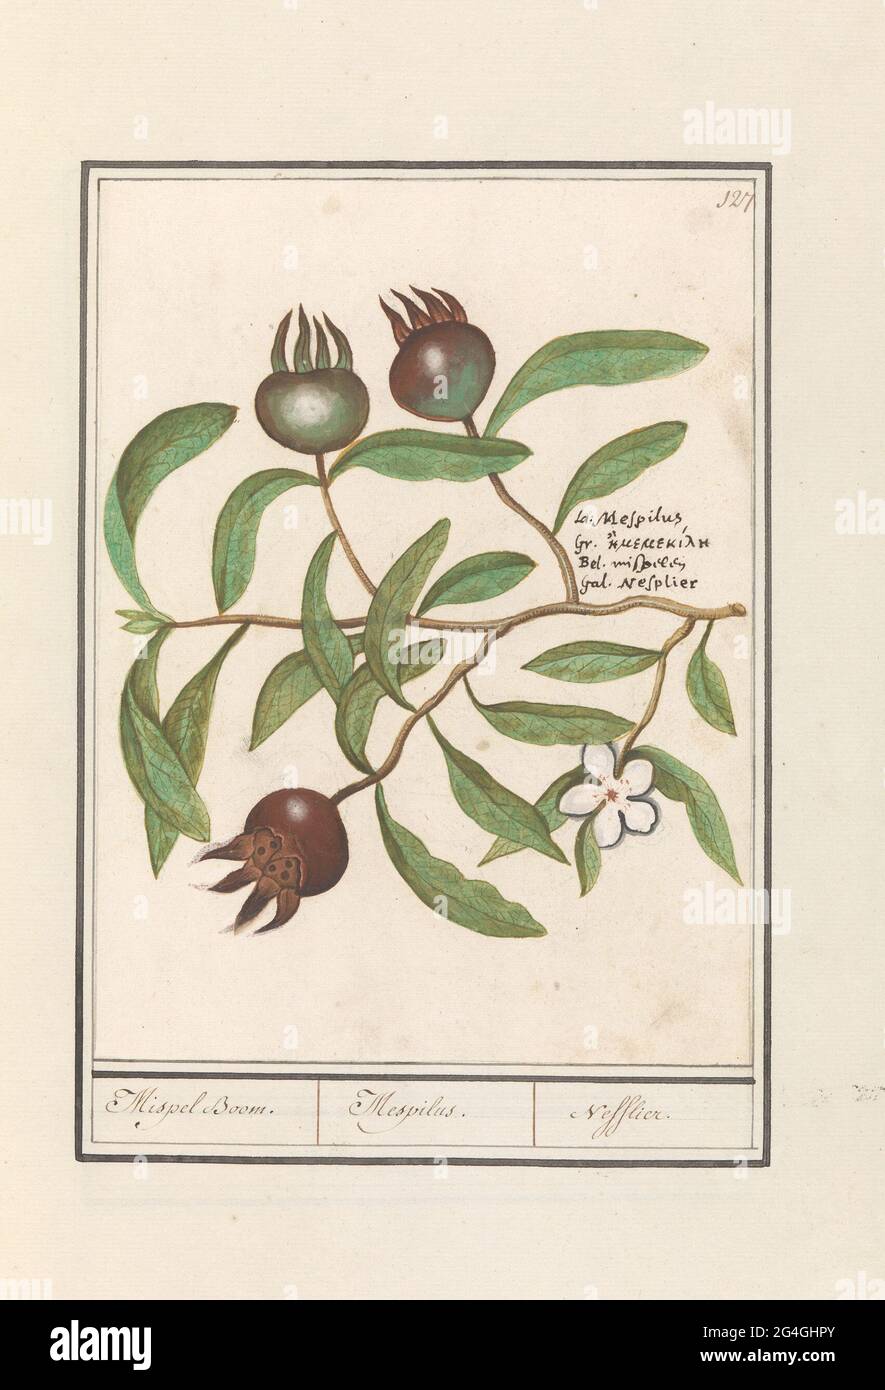 Mispel (Mespilus germanica); Mispel Boom. / Mespilus. / Nefflier. Mispel, branch with leaves, flower and fruits. At the top right numbered: 127. On the right the name in four languages. Part of the second album with drawings of flowers and plants. Ninth of twelve albums with drawings of animals, birds and plants known around 1600, made by Emperor Rudolf II. With explanation in Dutch, Latin and French. Stock Photo